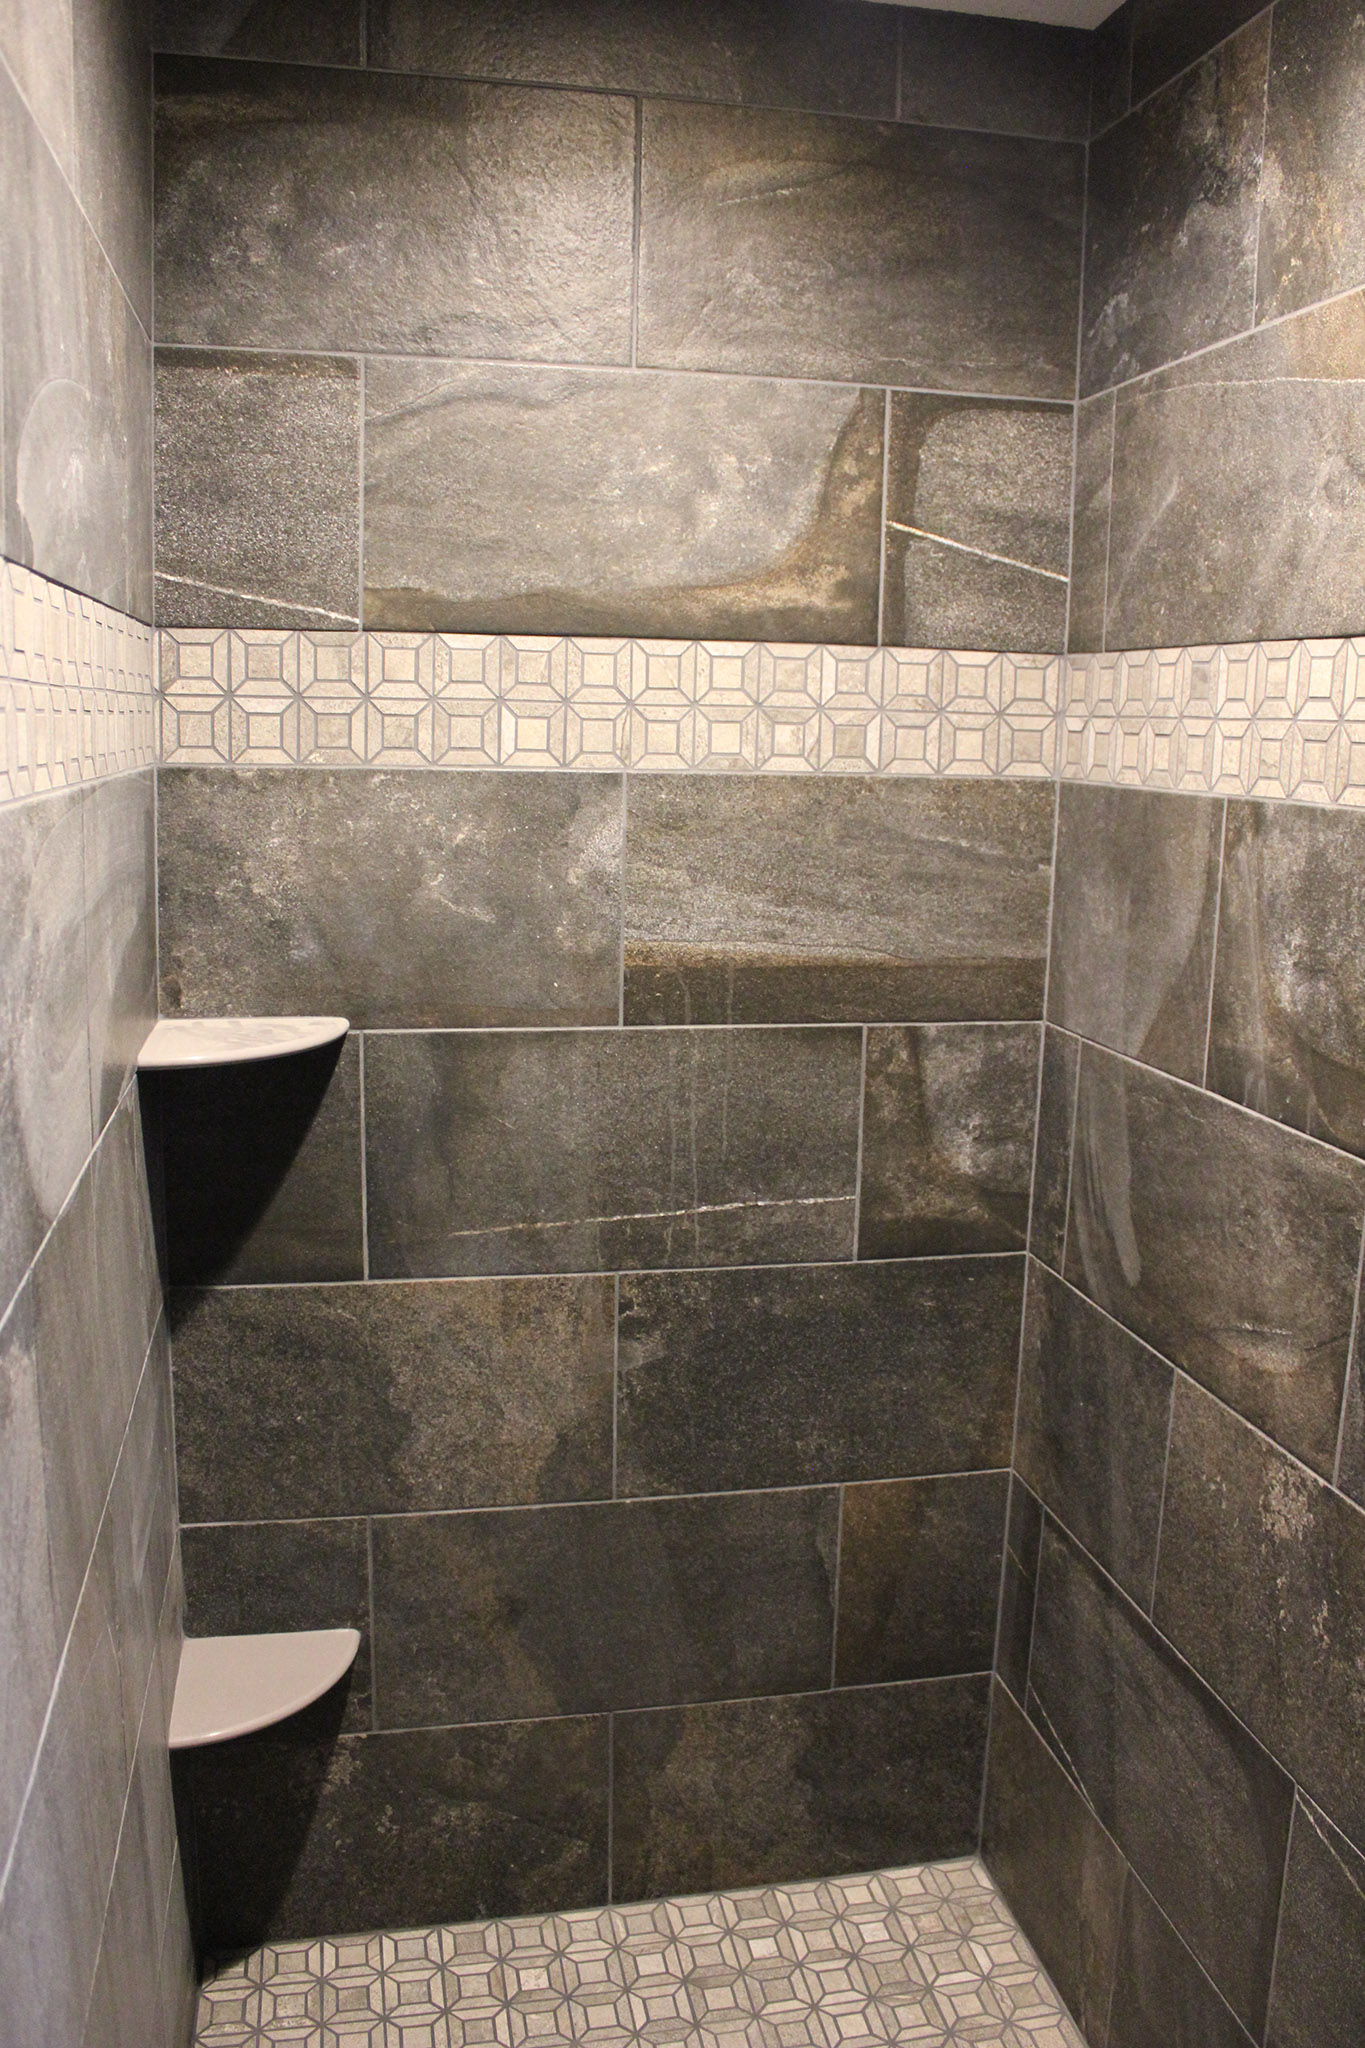 Master bath walk-in ceramic tile shower with mosaic border and floor and corner shelves